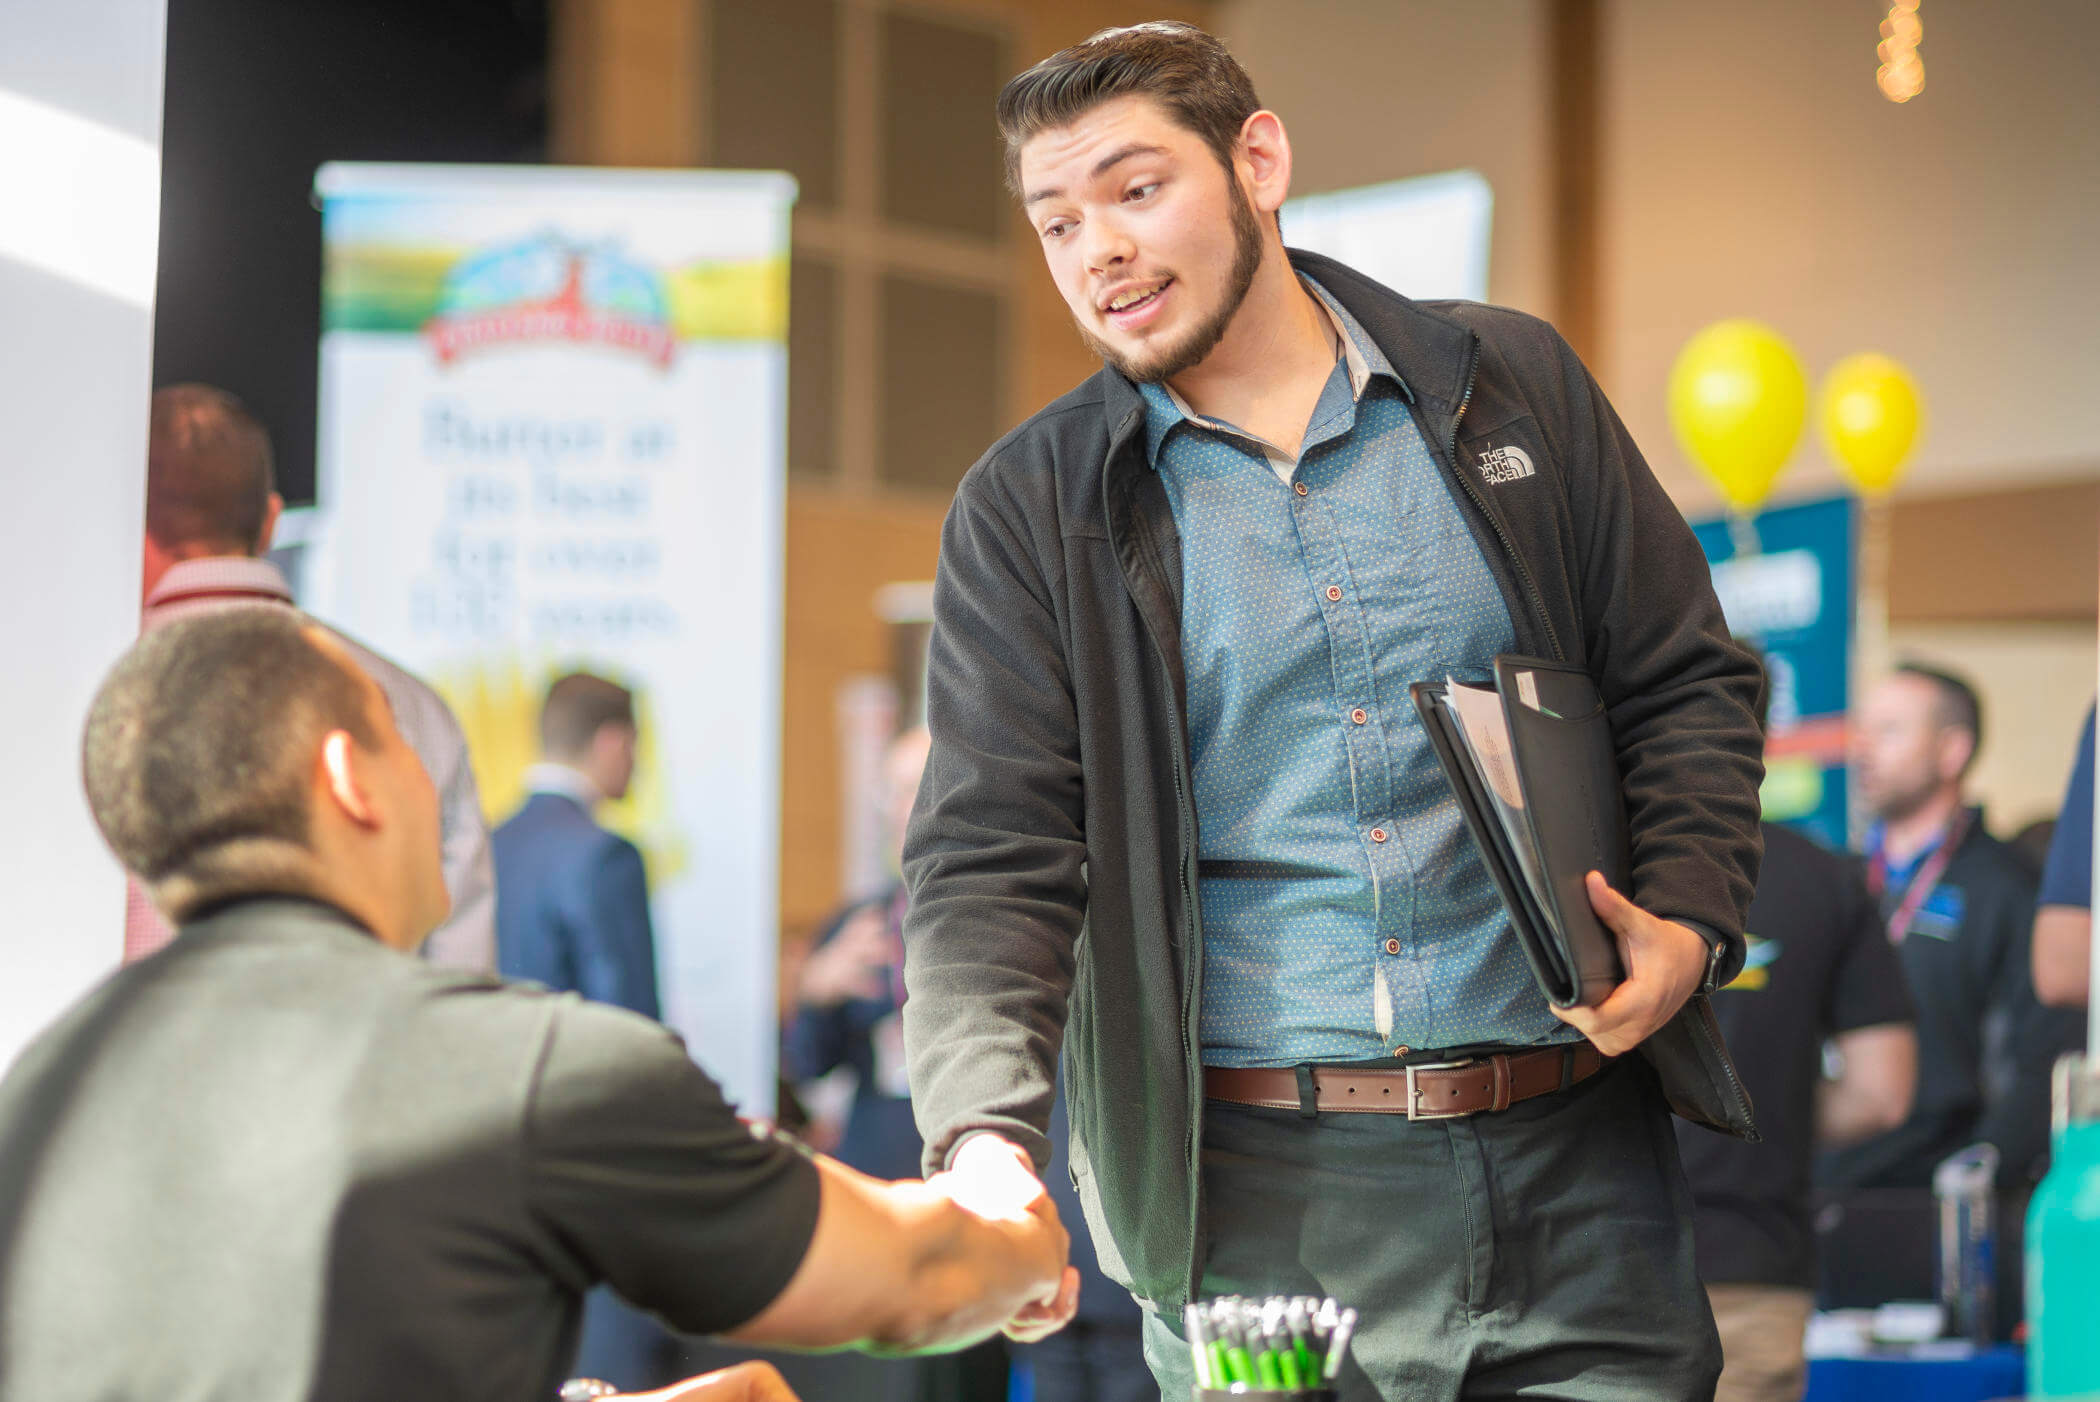 A student shakes a hand of a potential employer at a career fair on campus.